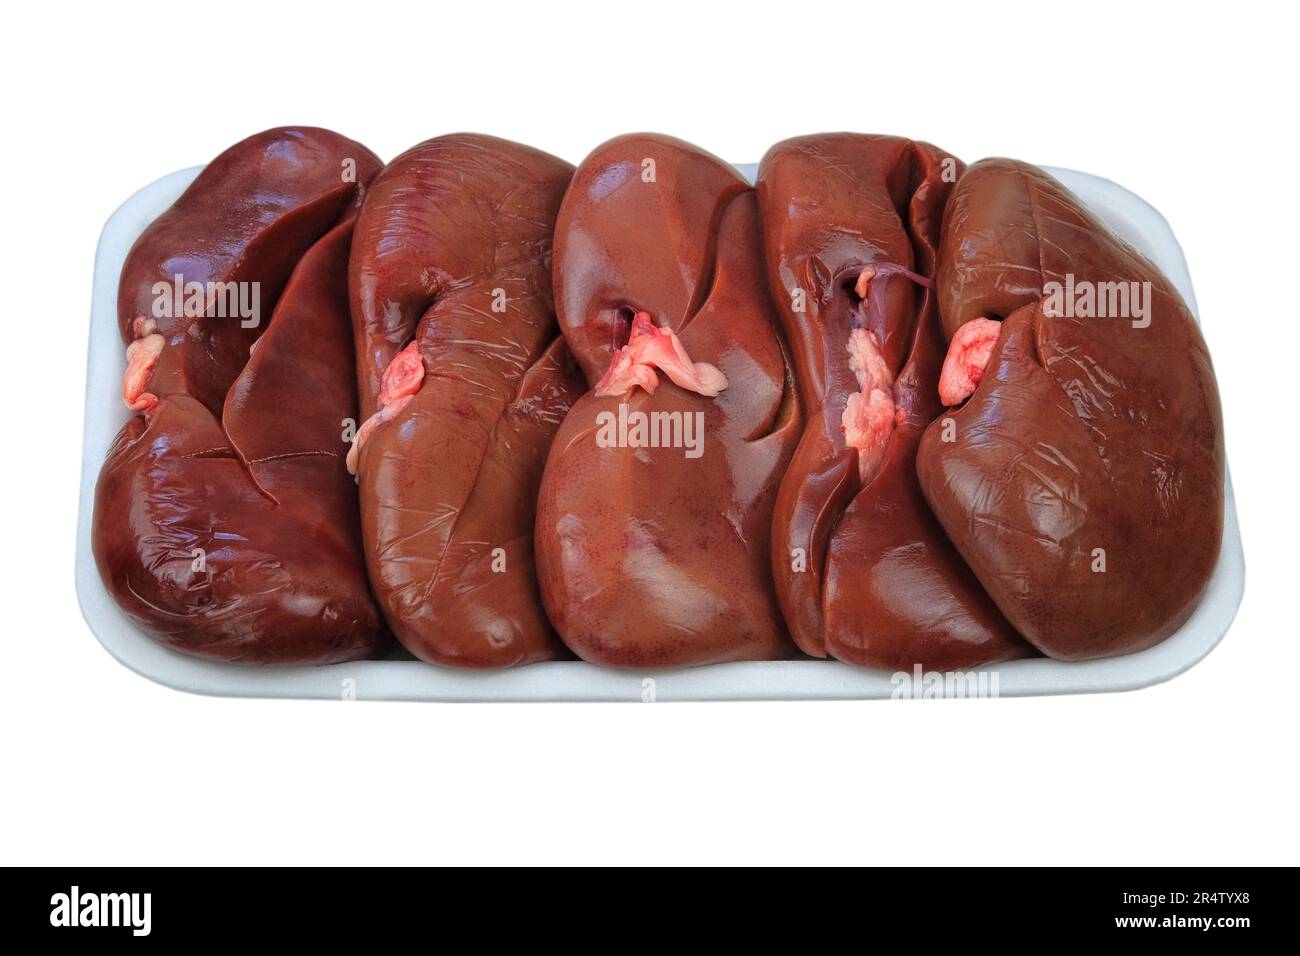 Raw pork kidneys in board isolated on white background. Raw meat offal. Stock Photo